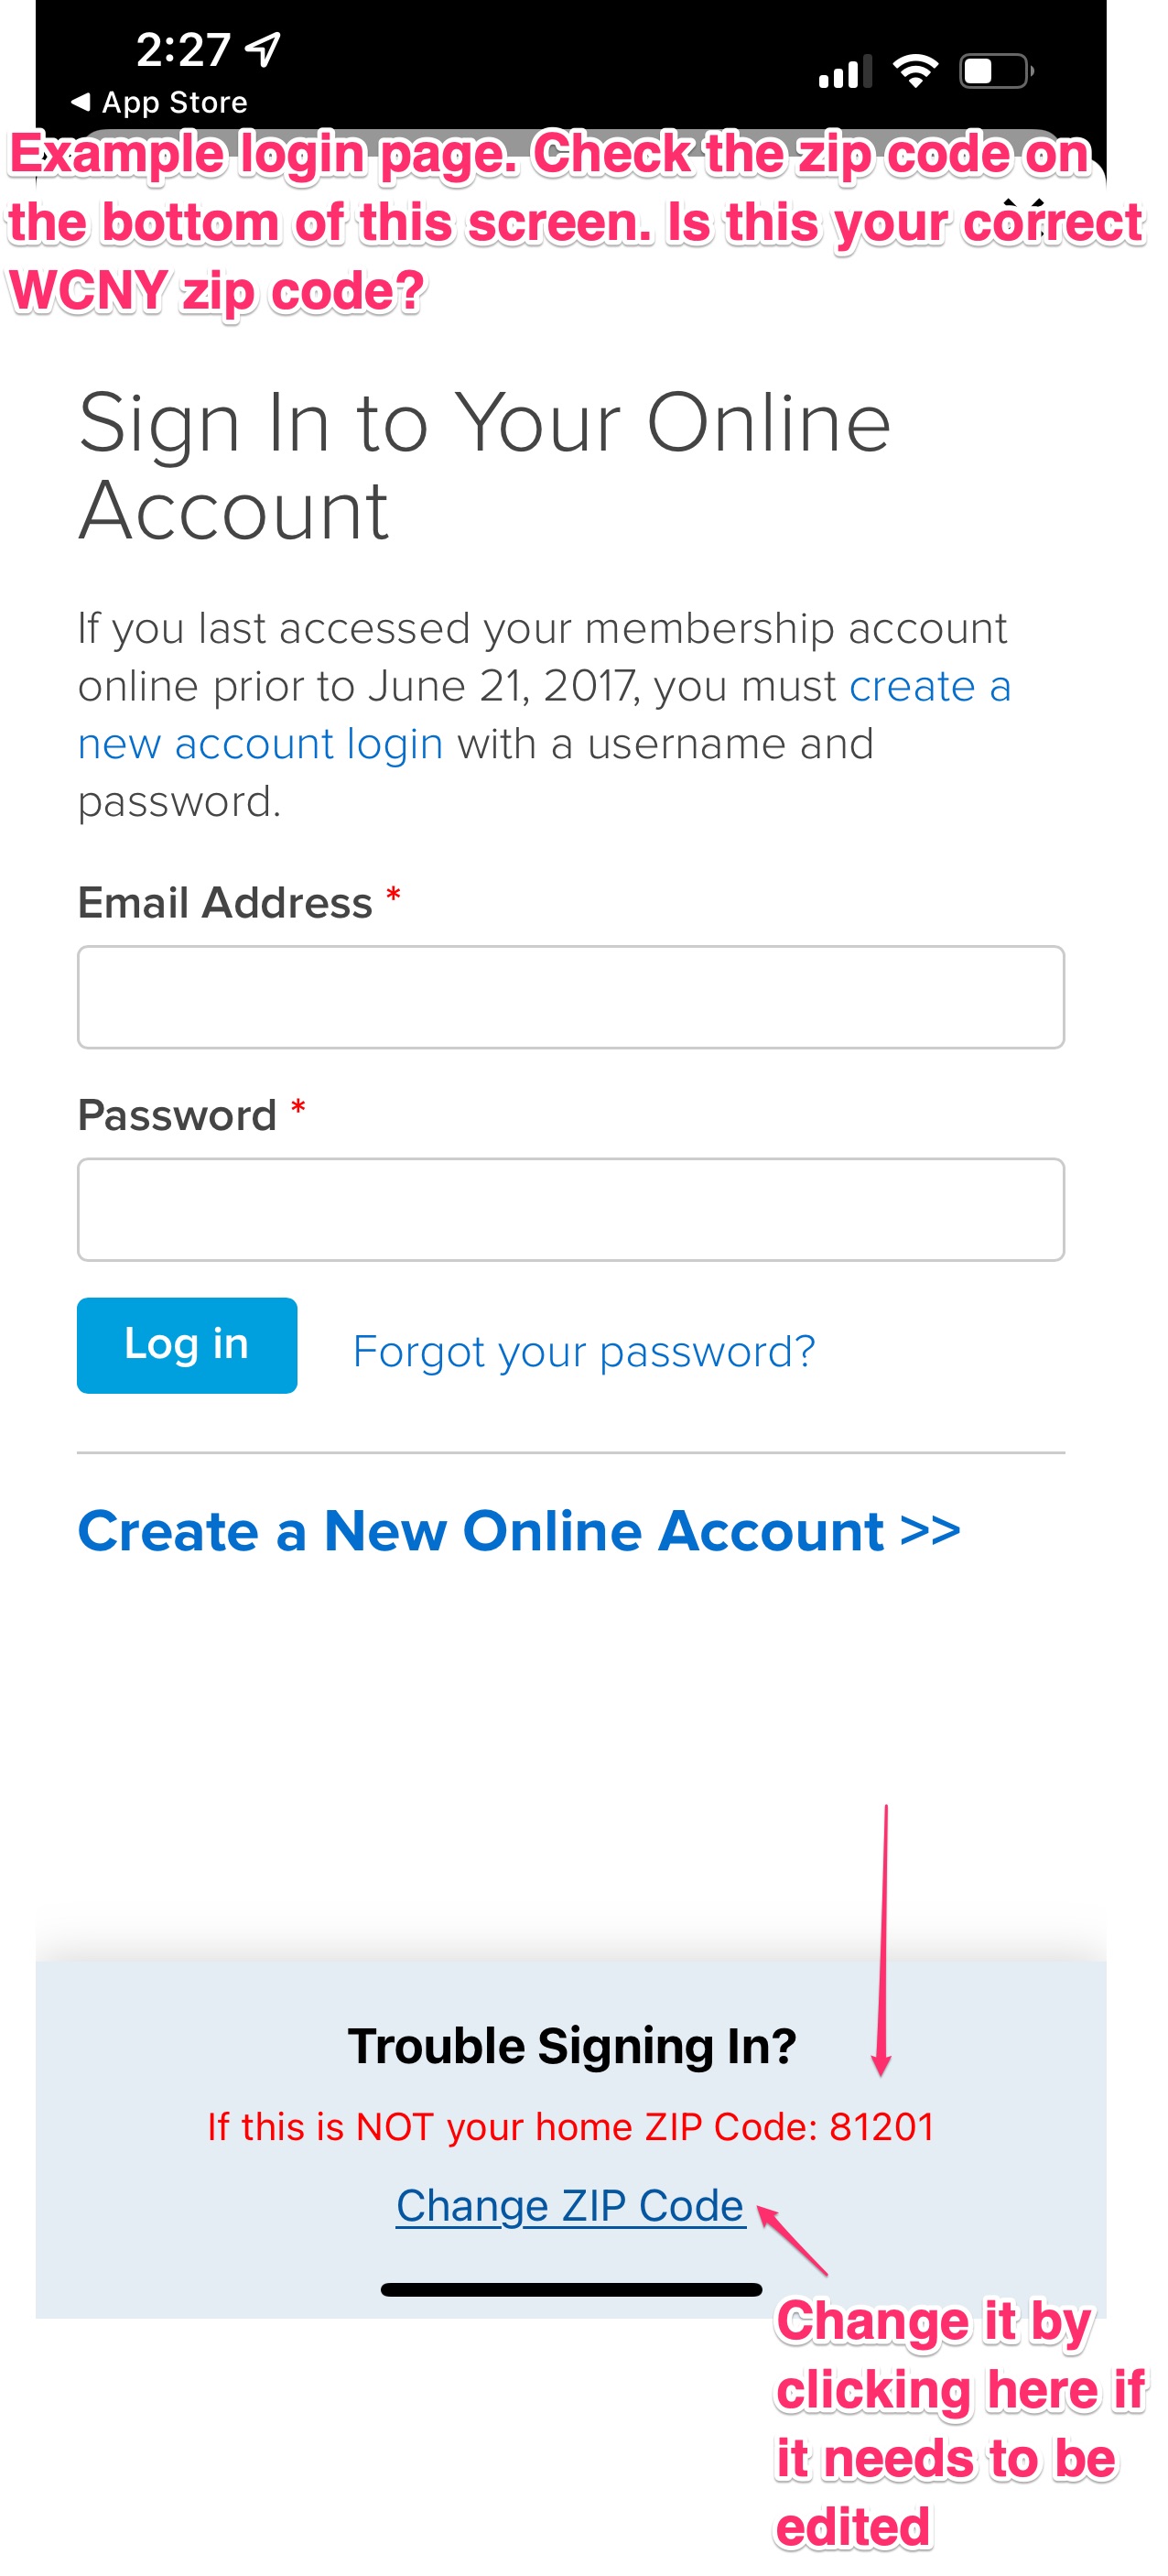 example login page showing the red zip code message on the bottom